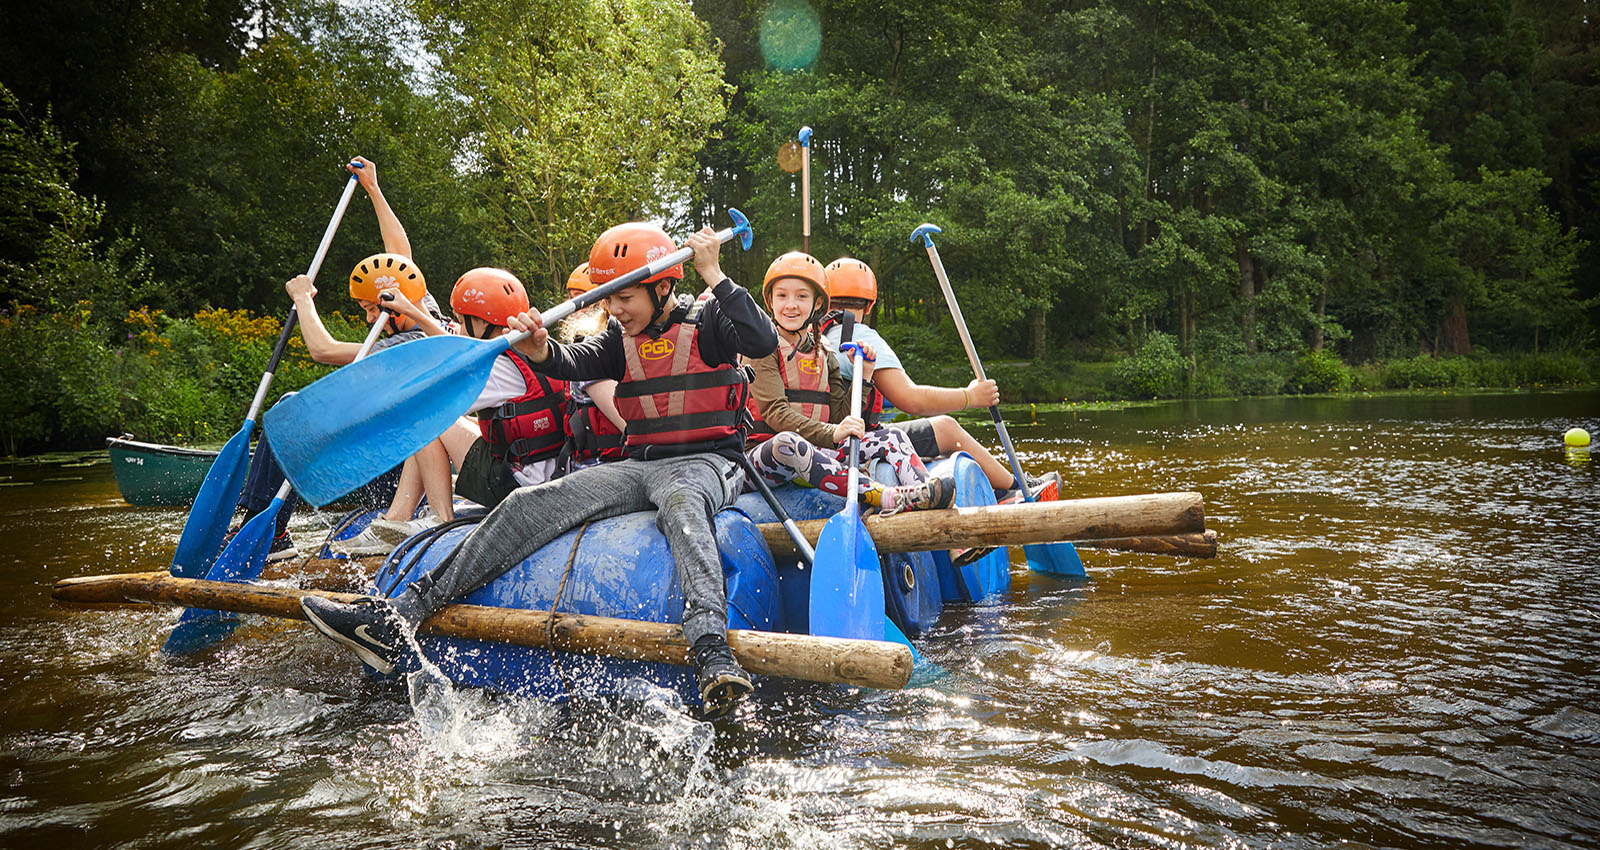 Multi Activity 7 night Adventure Holidays for 7-17 year olds in the UK